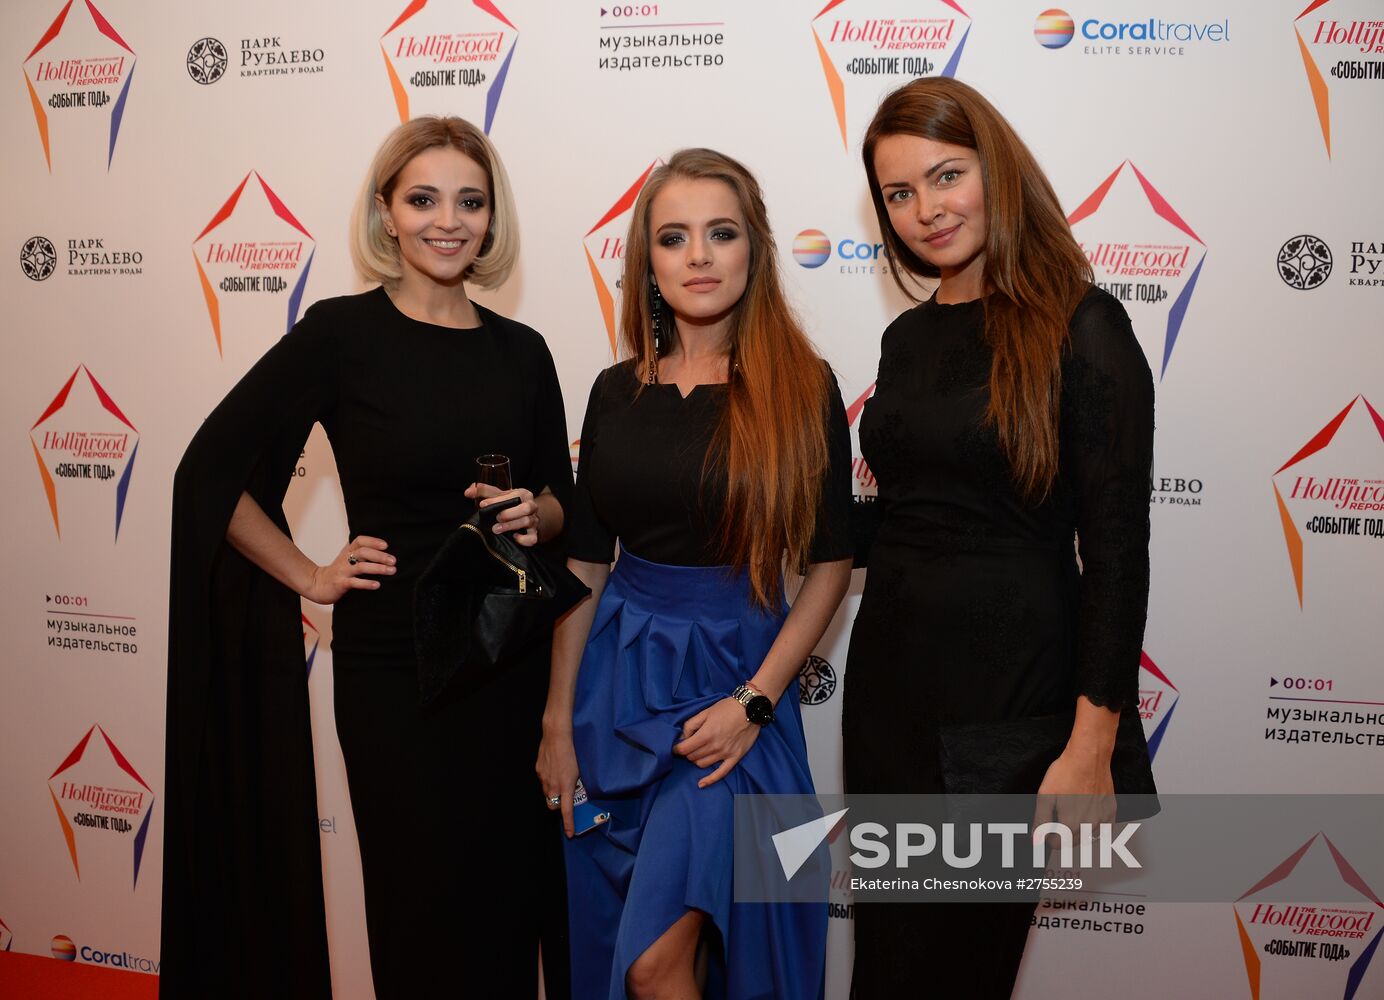 Hollywood Reporter Event of the Year award ceremony in Moscow